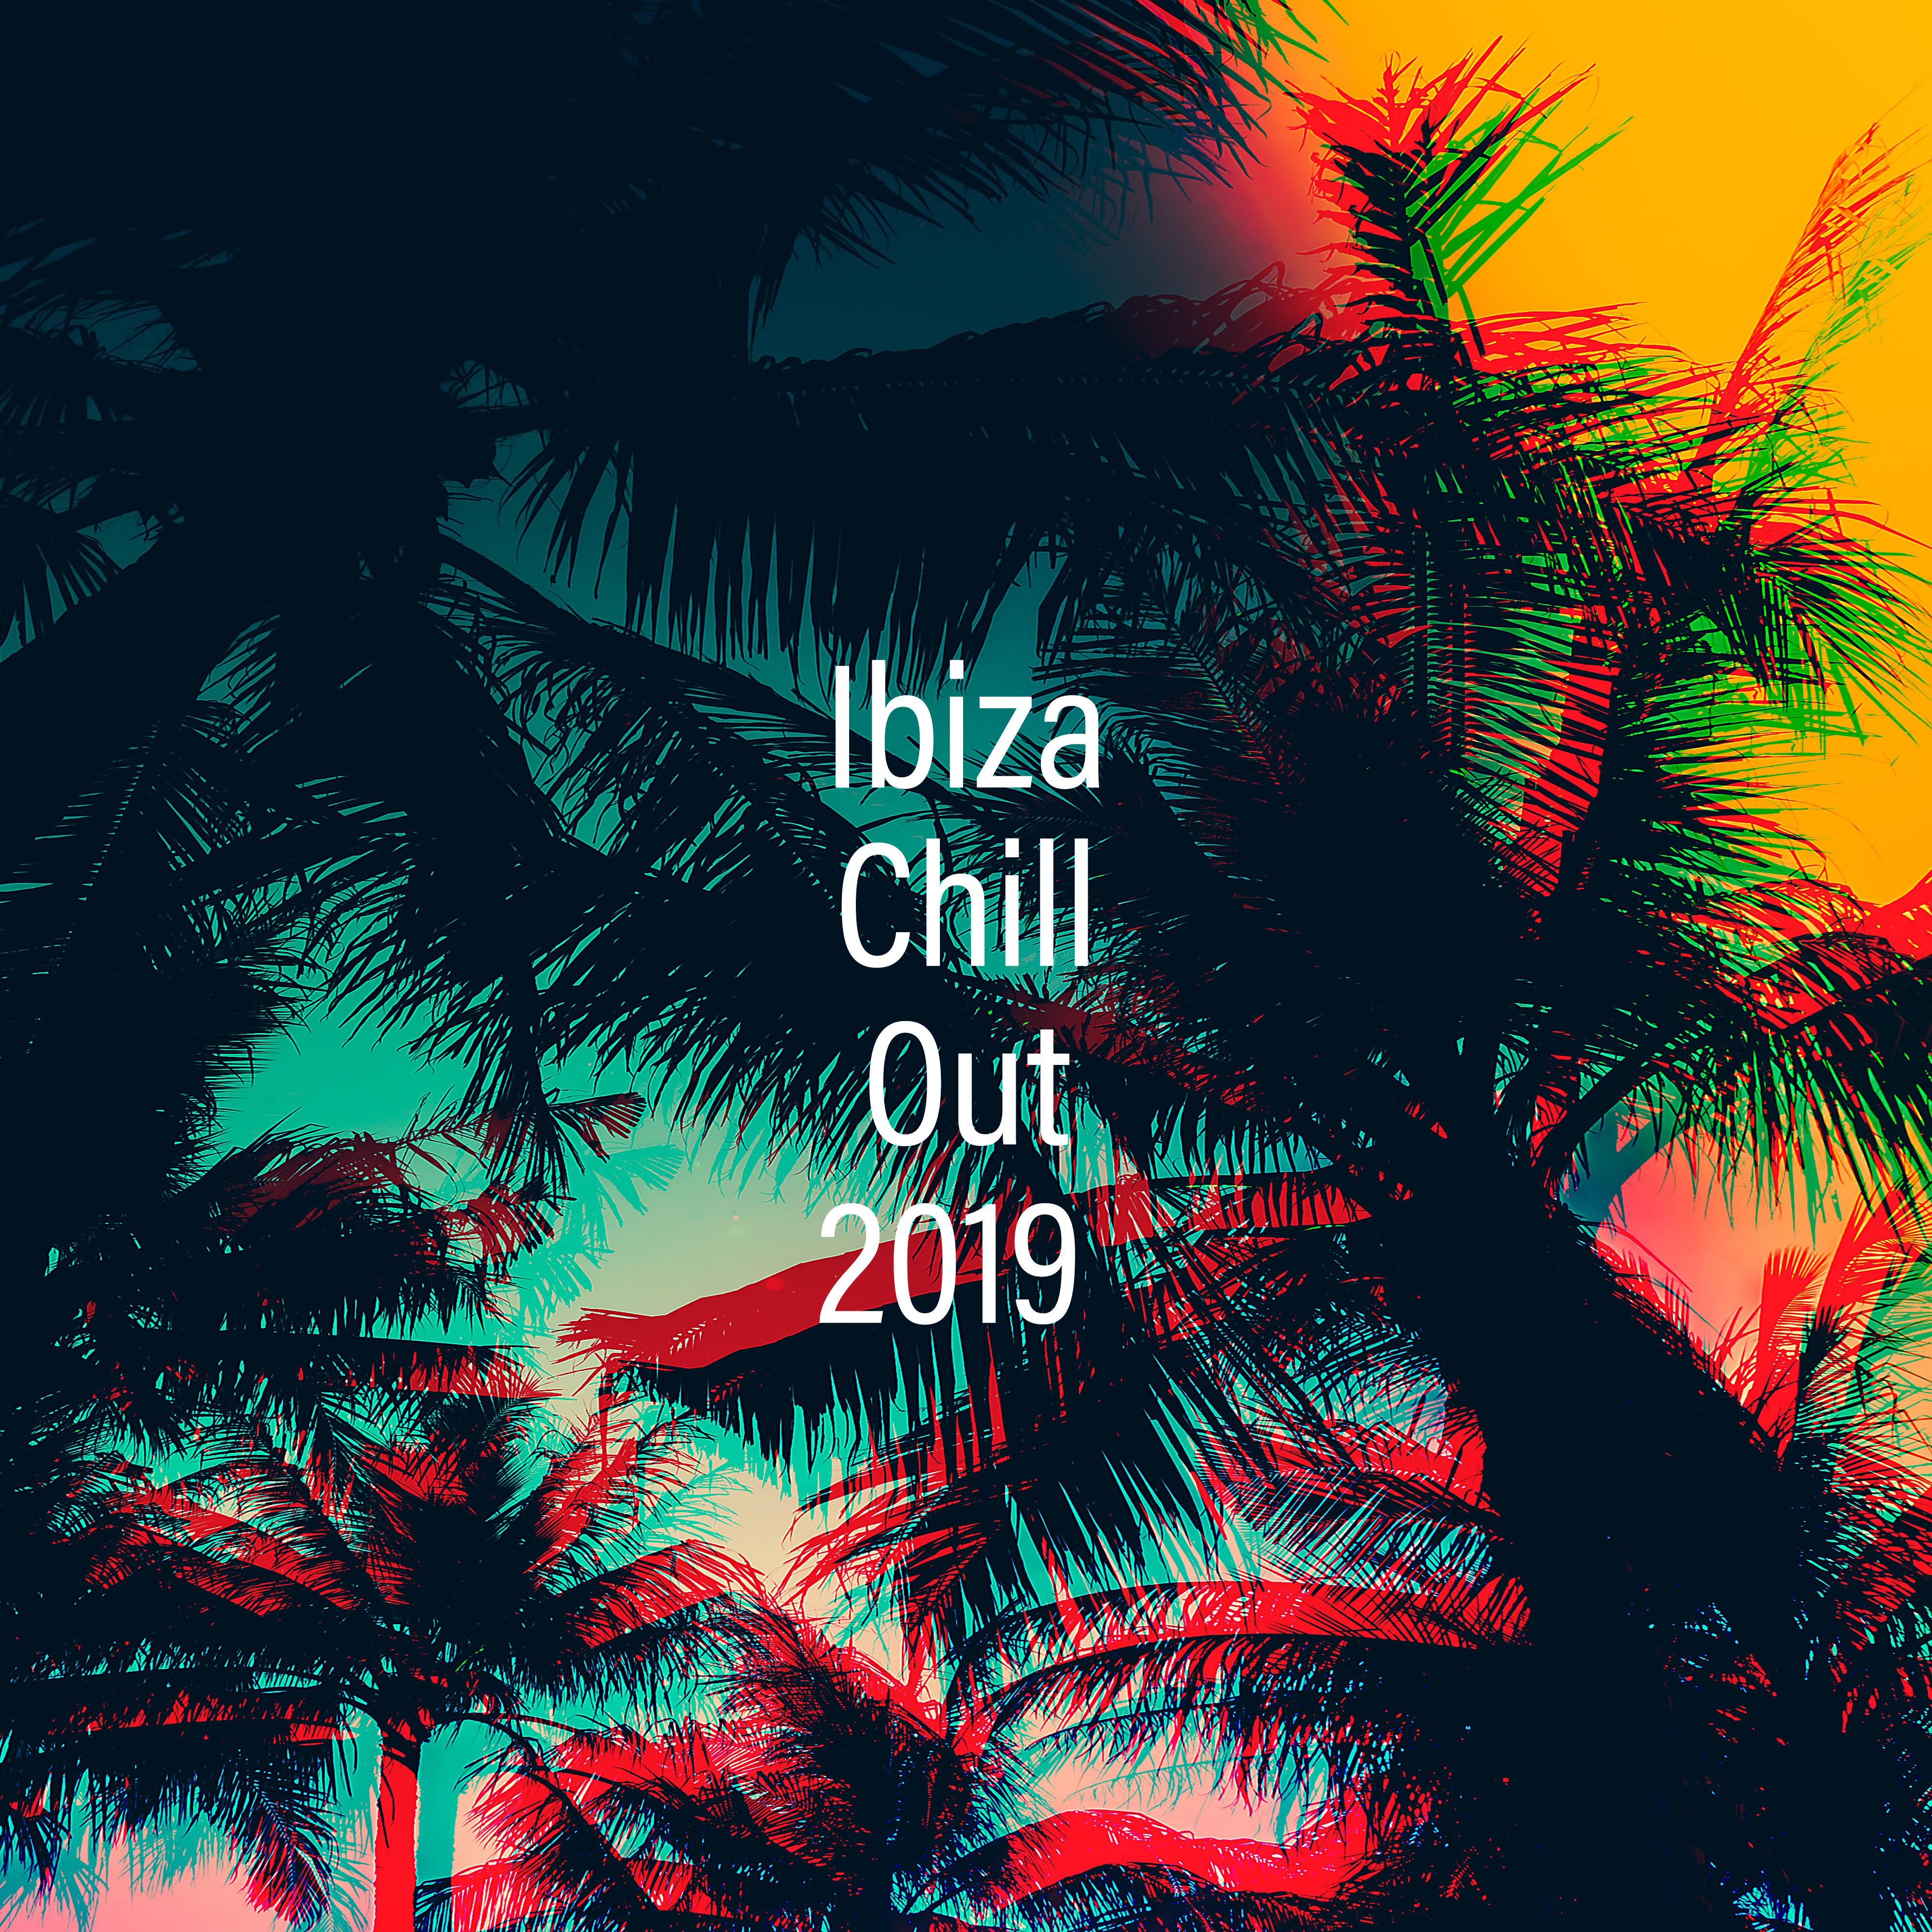 Ibiza Chill Out 2019 – Music Zone, Summer 2019, Deep Chillout Lounge, Beach Music